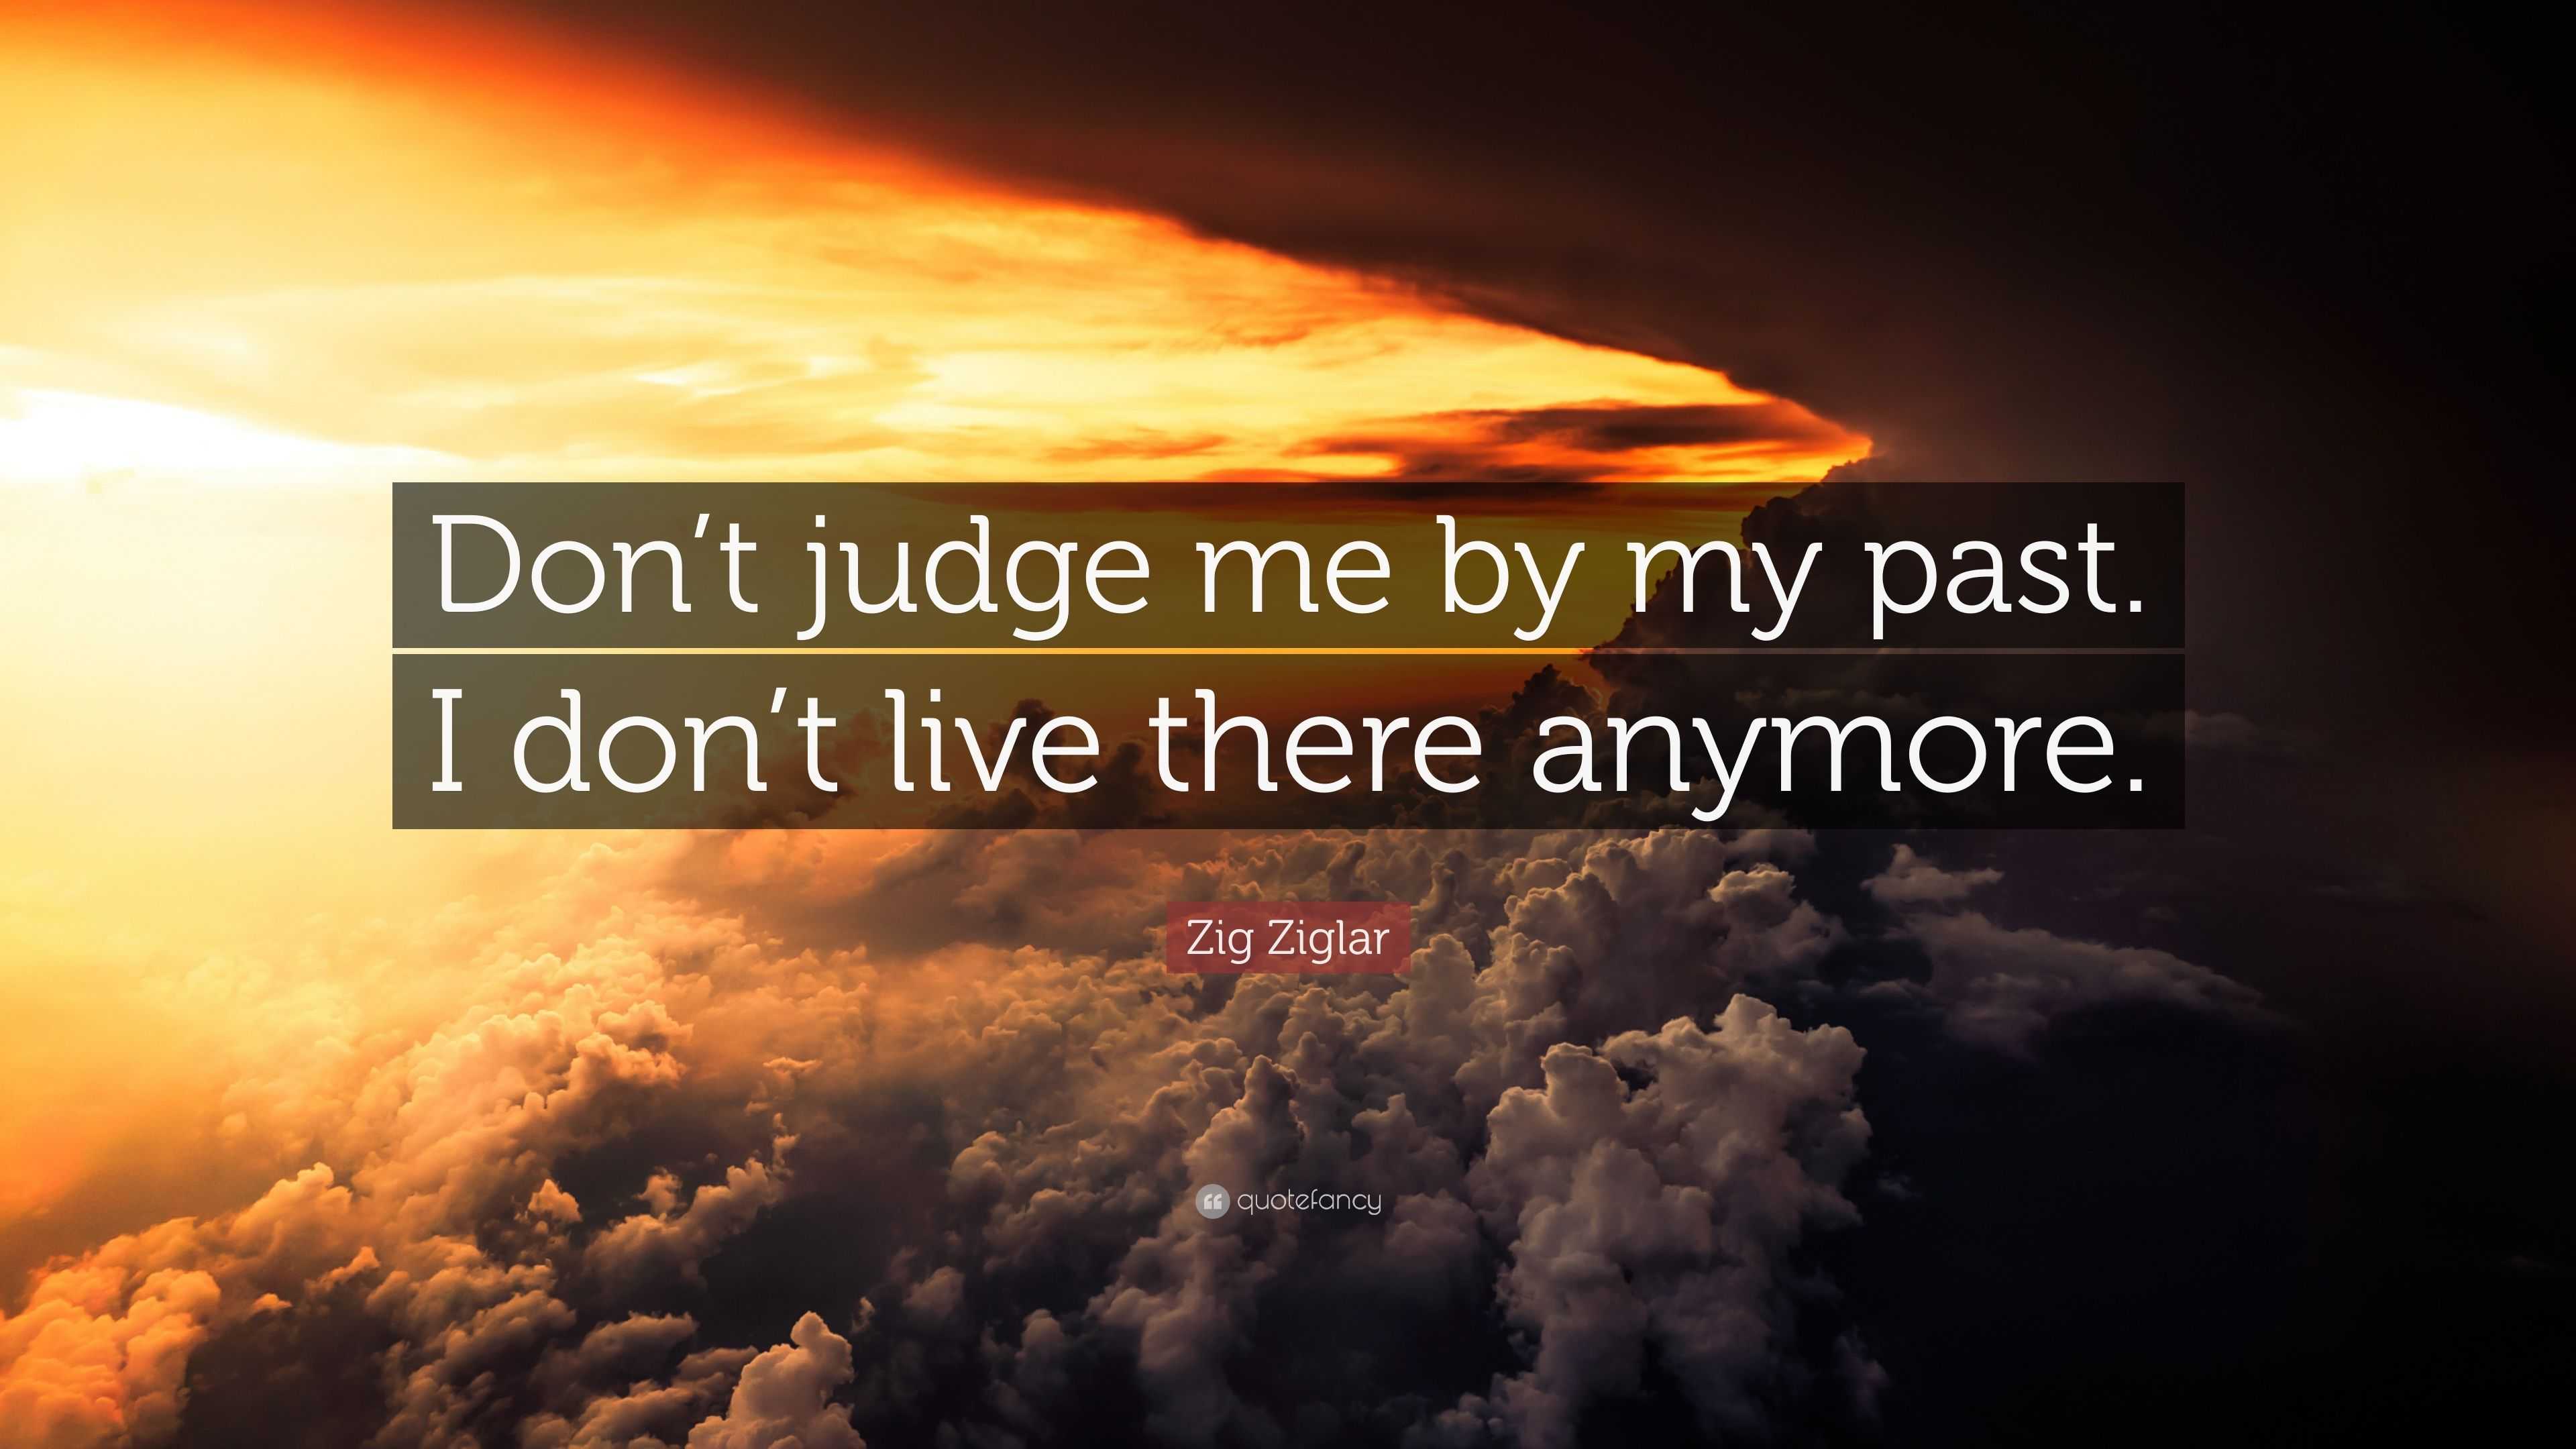 Zig Ziglar Quote “dont Judge Me By My Past I Dont Live There Anymore”